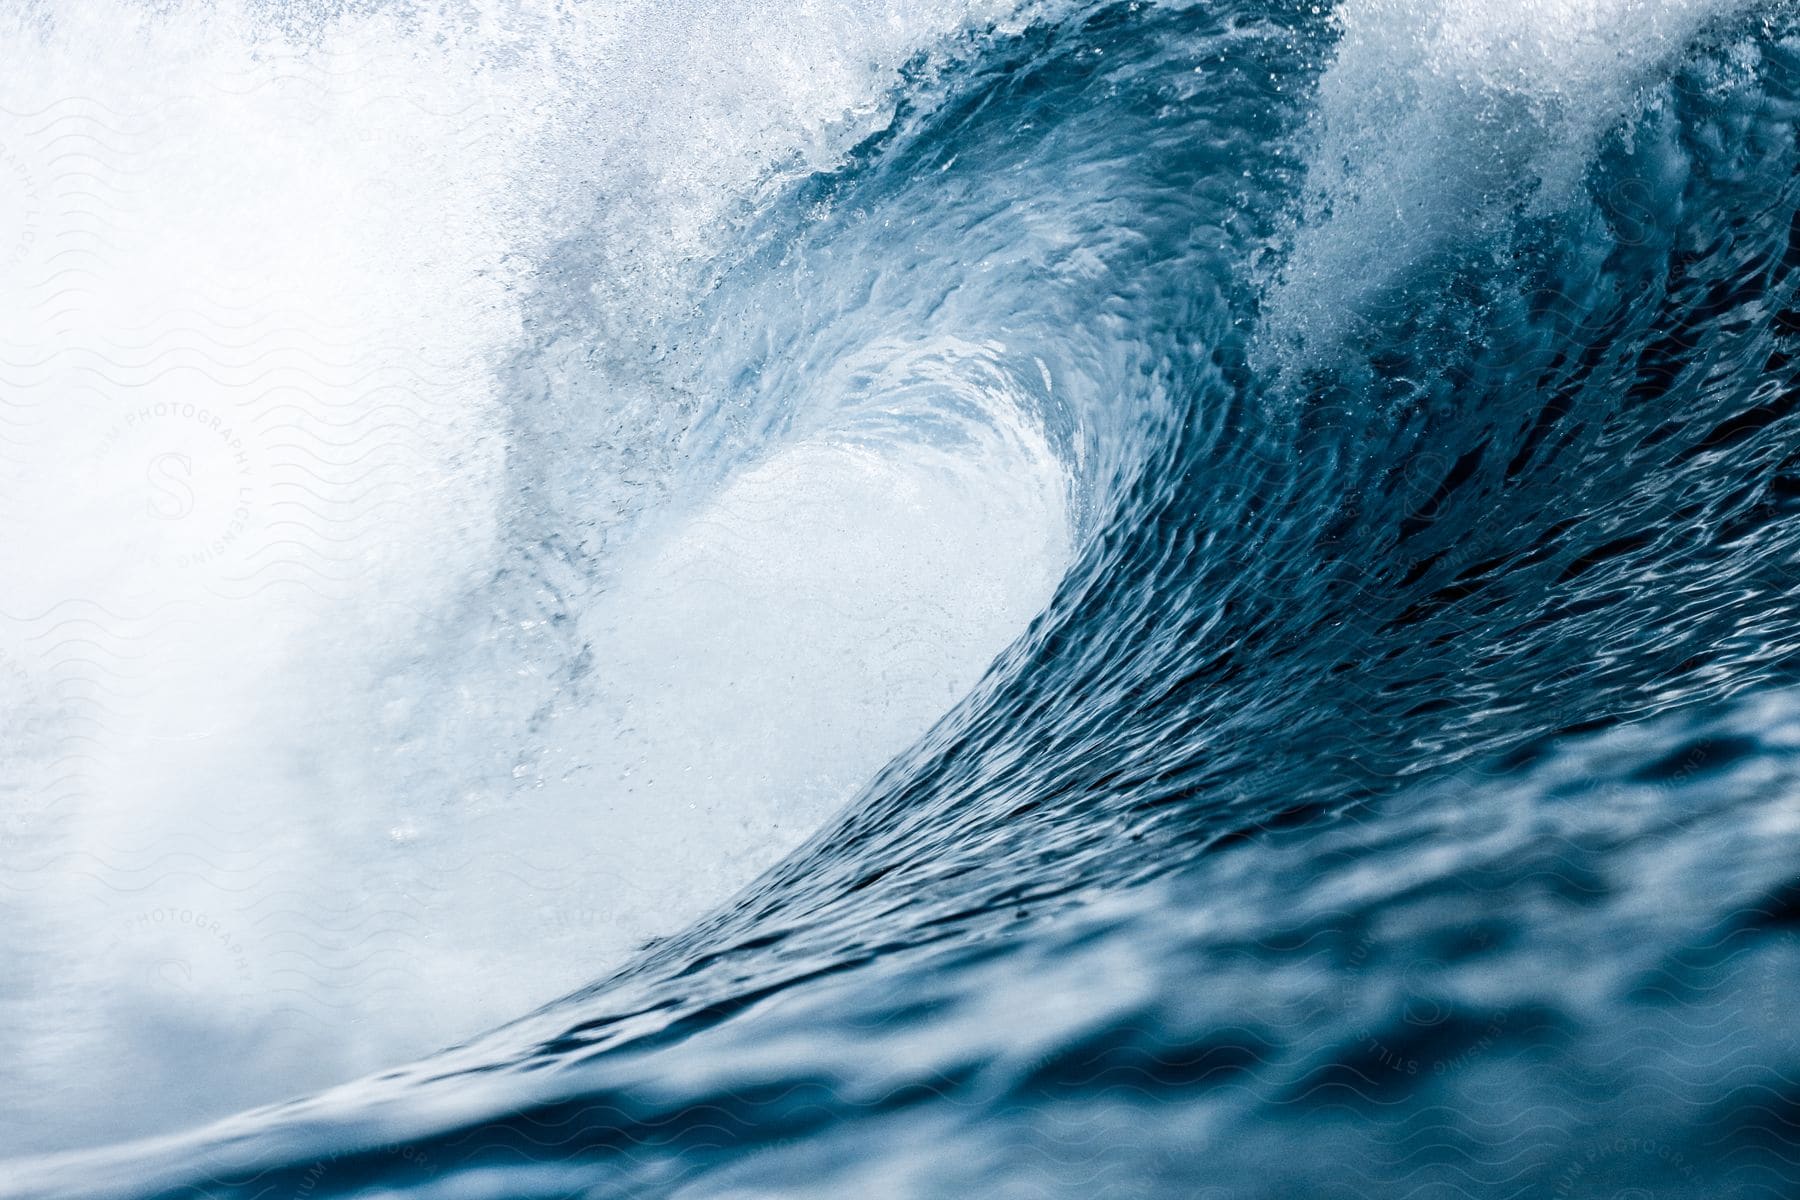 Close up of a large ocean wave curling and crashing in the ocean